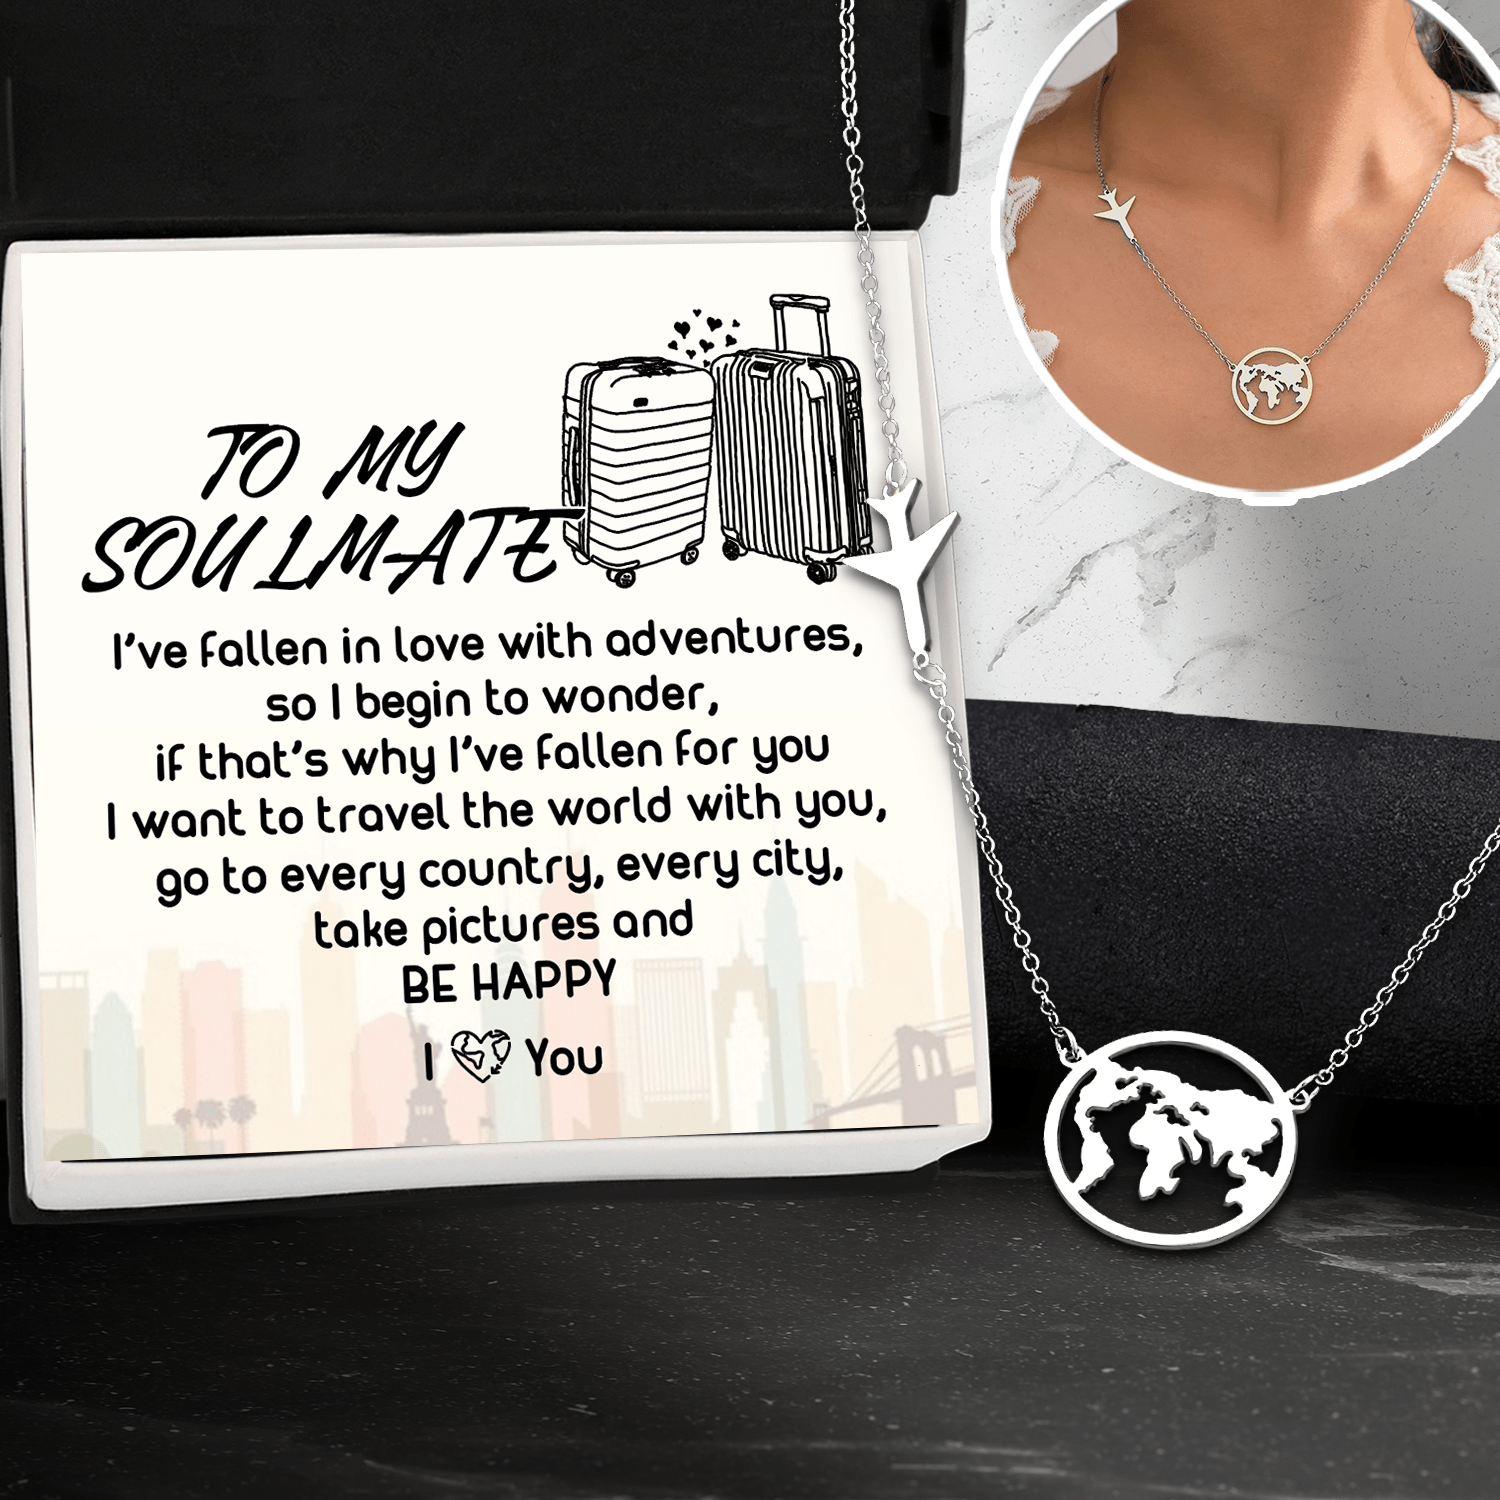 Airplane Globe Necklace - Travel - To My Soulmate - I Want To Travel The World With You - Gnnv13004